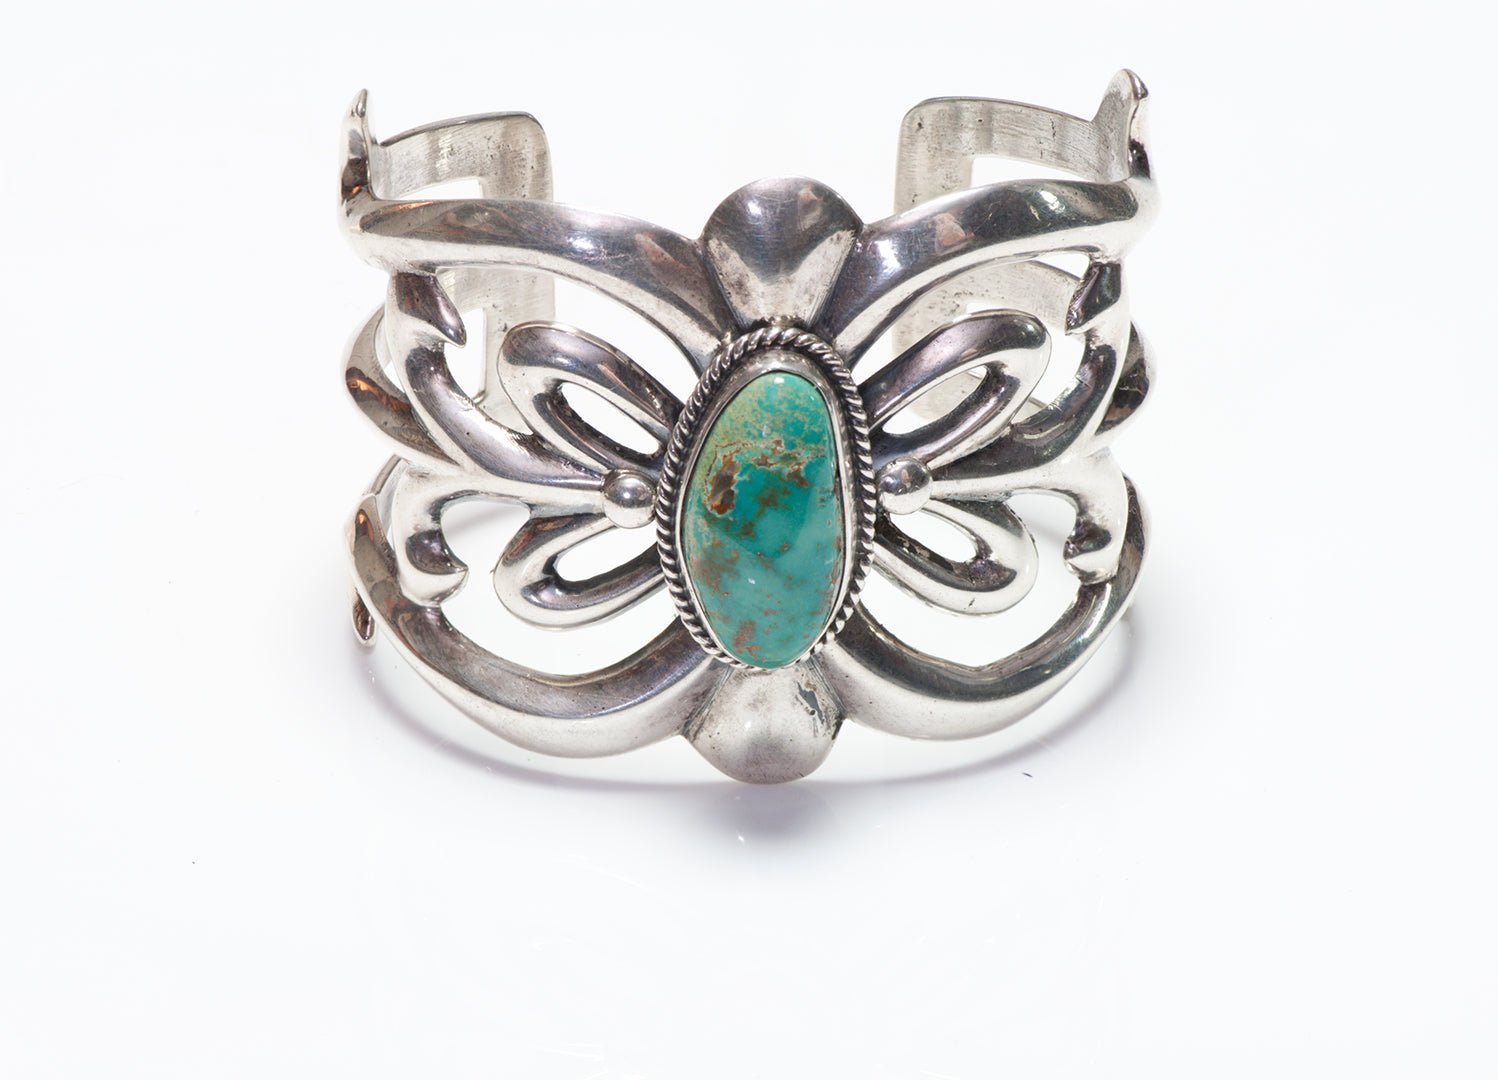 Native American W. Begay Navajo Sterling Silver Turquoise Cuff Bracelet